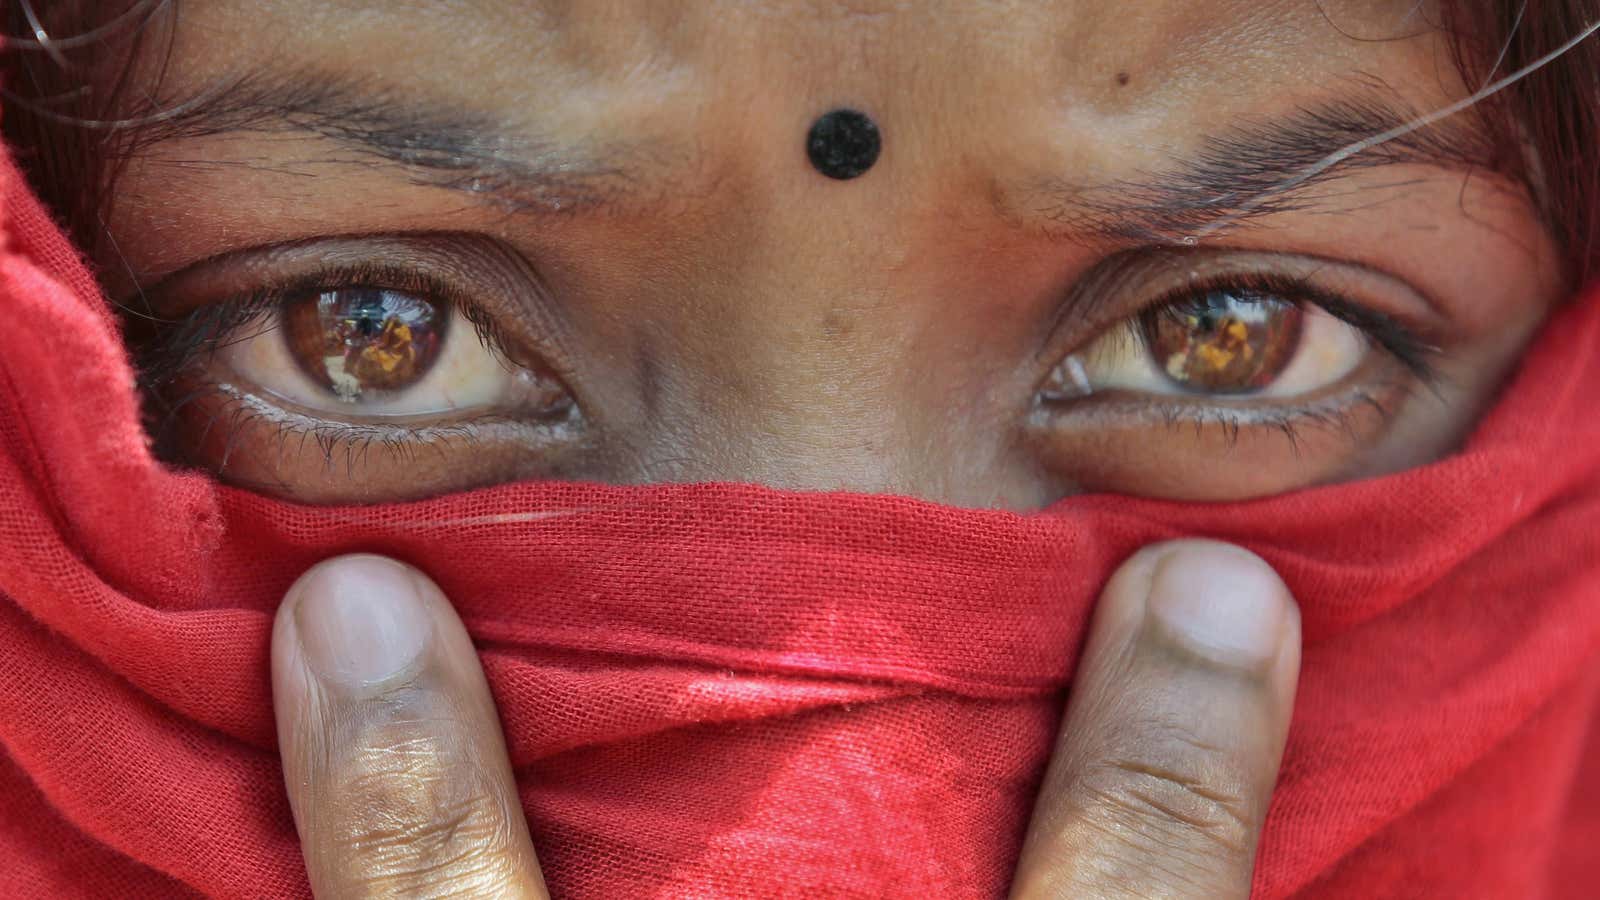 A garment worker during a protest in Dhaka, Bangladesh.